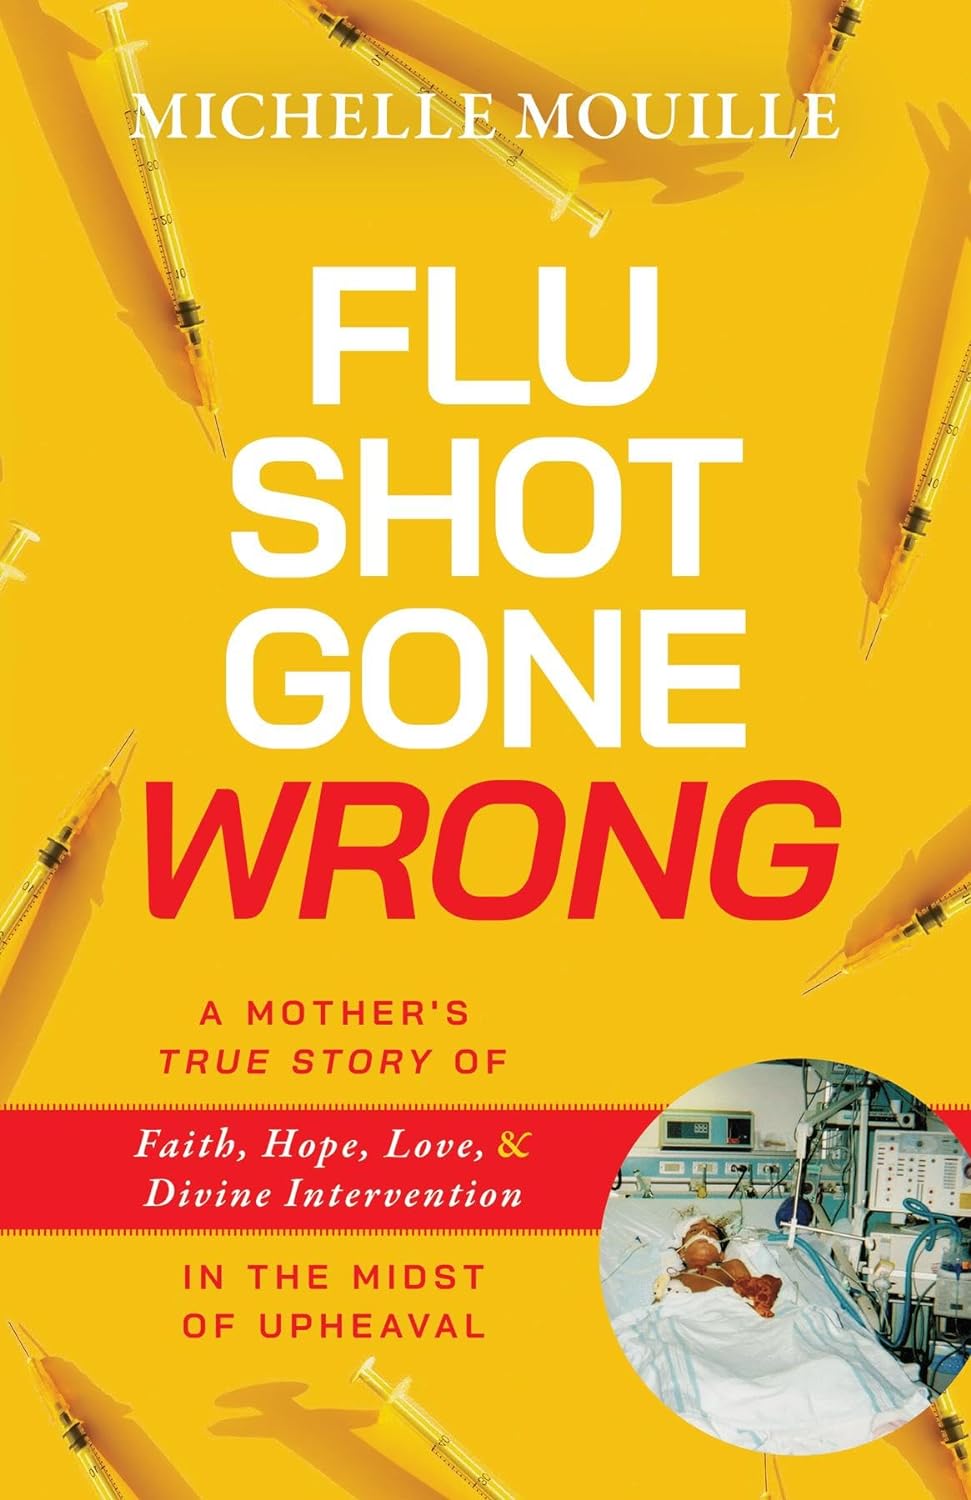 New book "Flu Shot Gone Wrong" by Michelle Mouille is released, the powerful true story of an adverse vaccine reaction and finding perseverance through faith